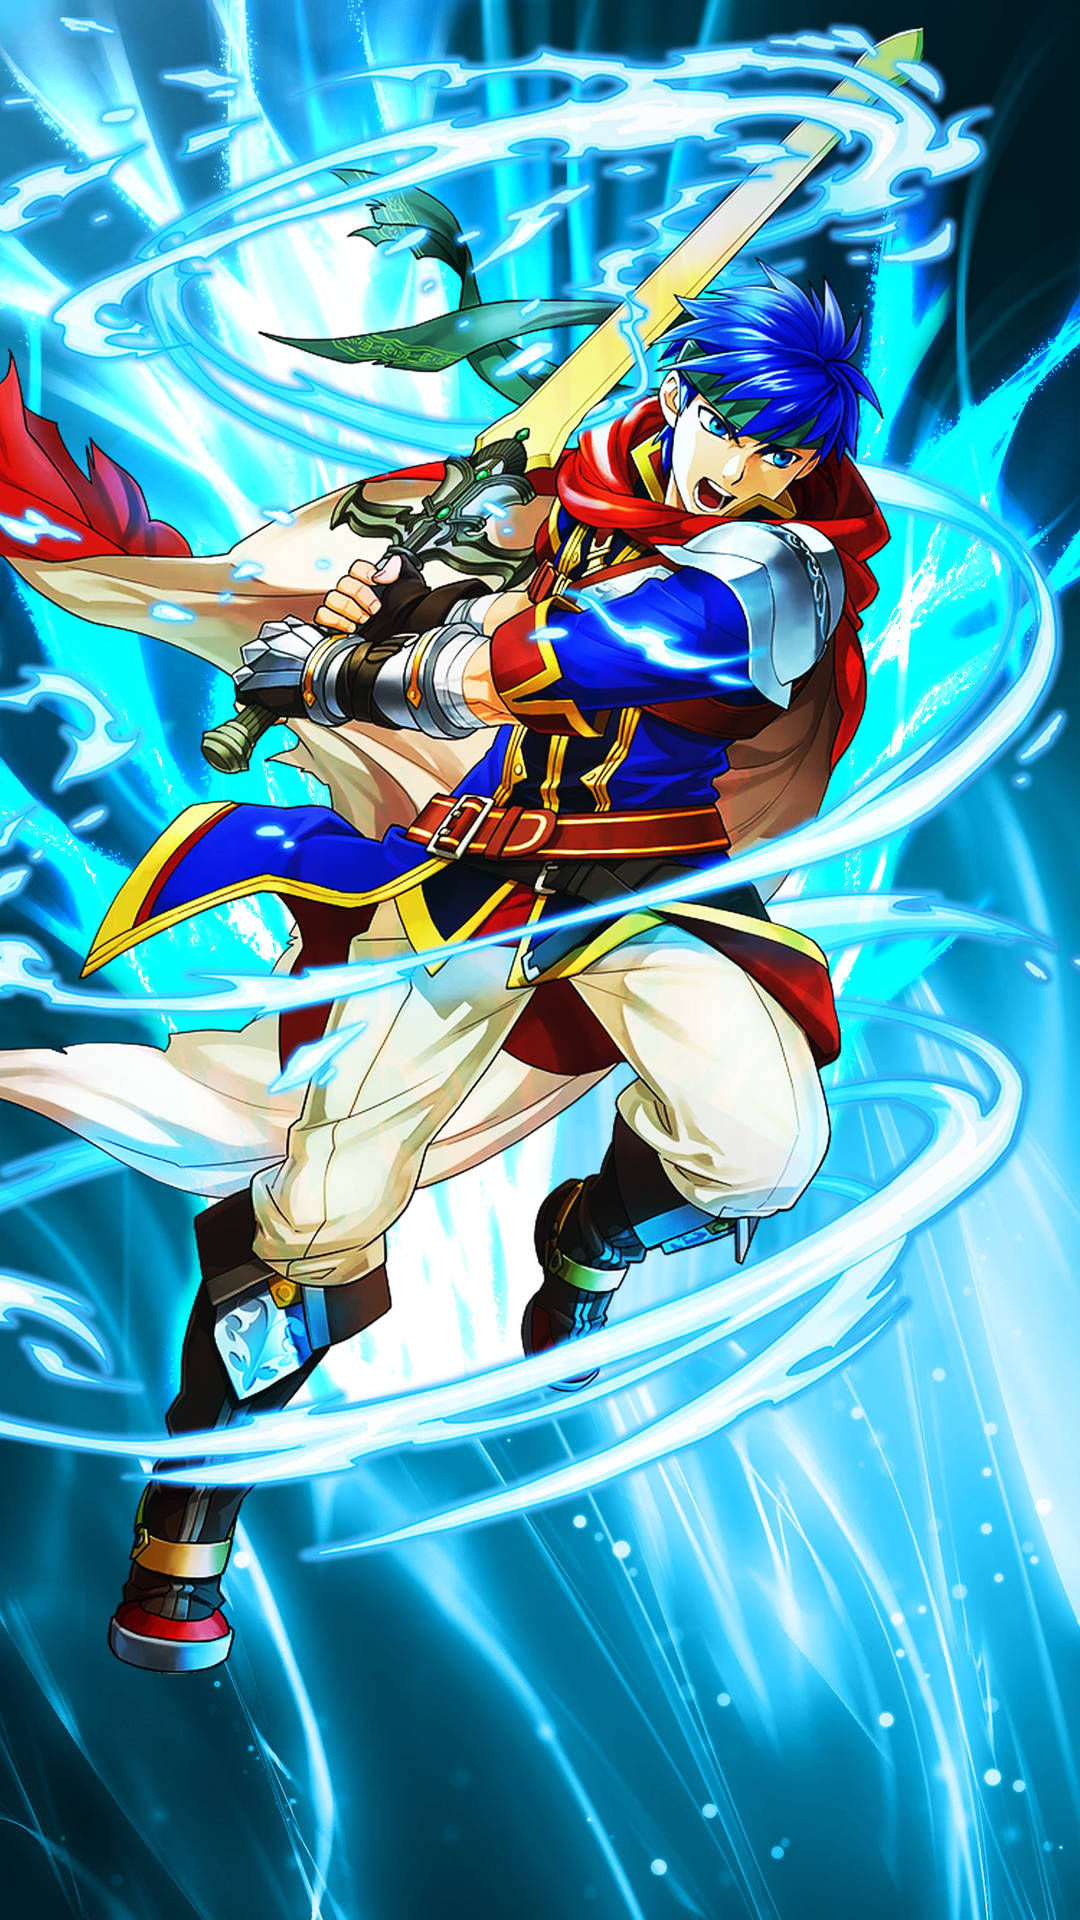 "Ike Led an Epic Charge to Victory!" Wallpaper